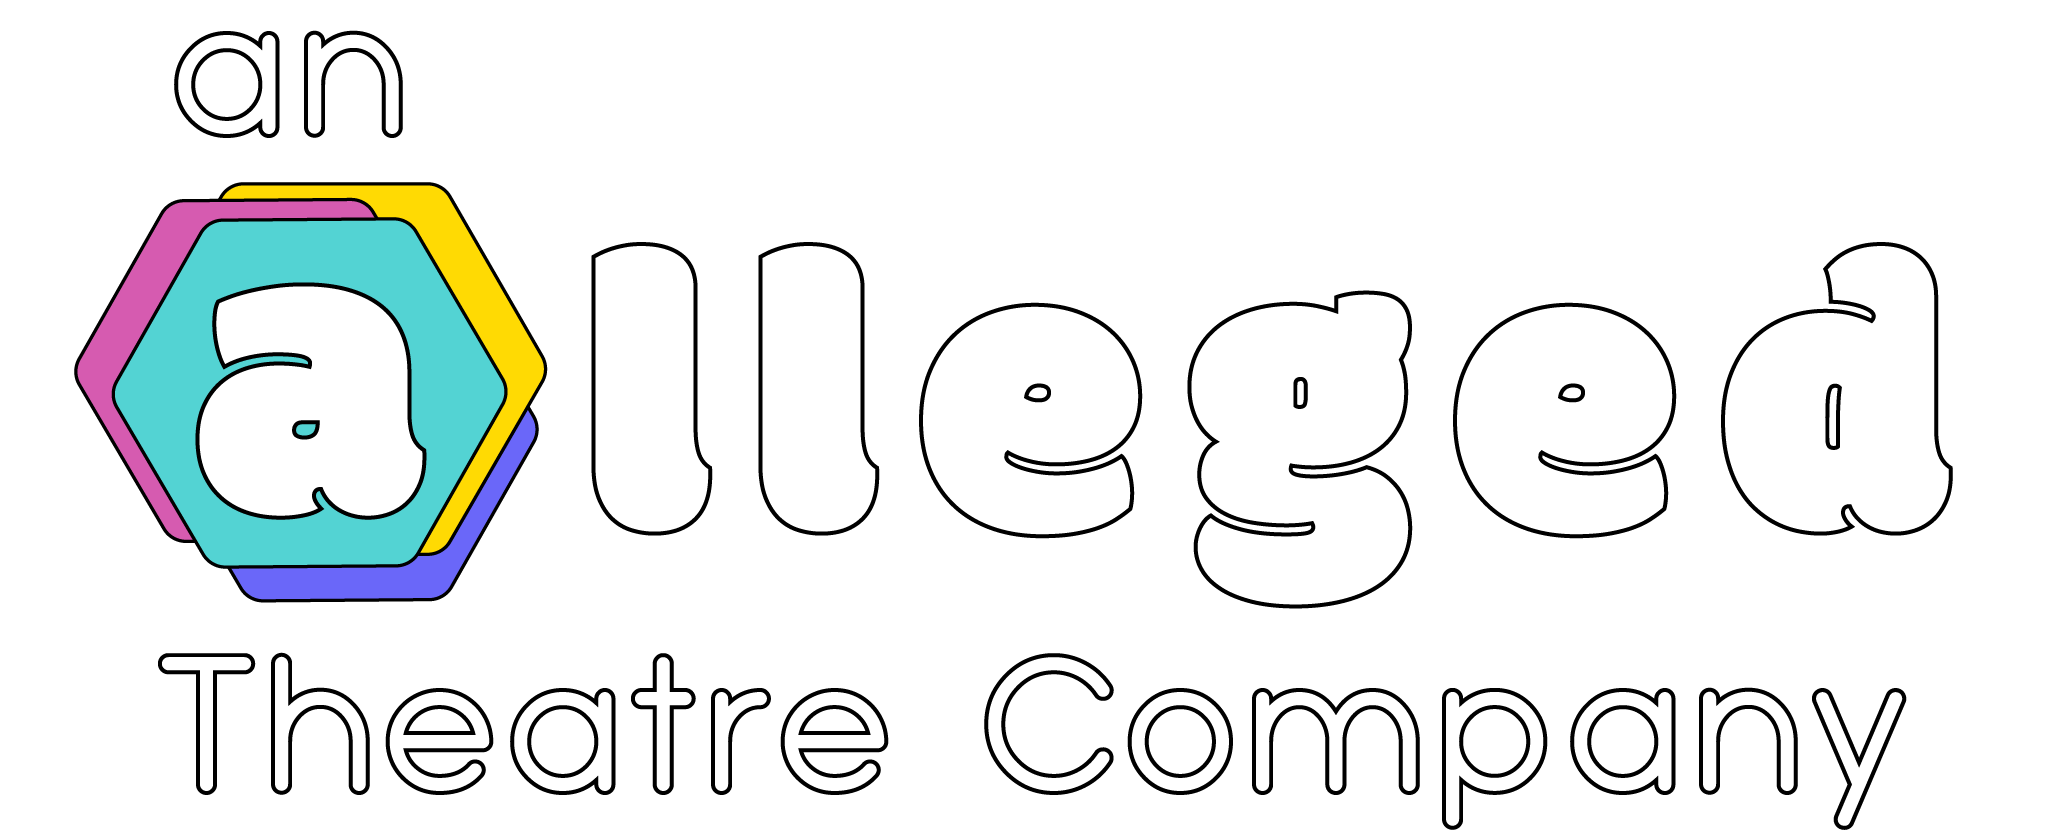 an alleged Theatre Company